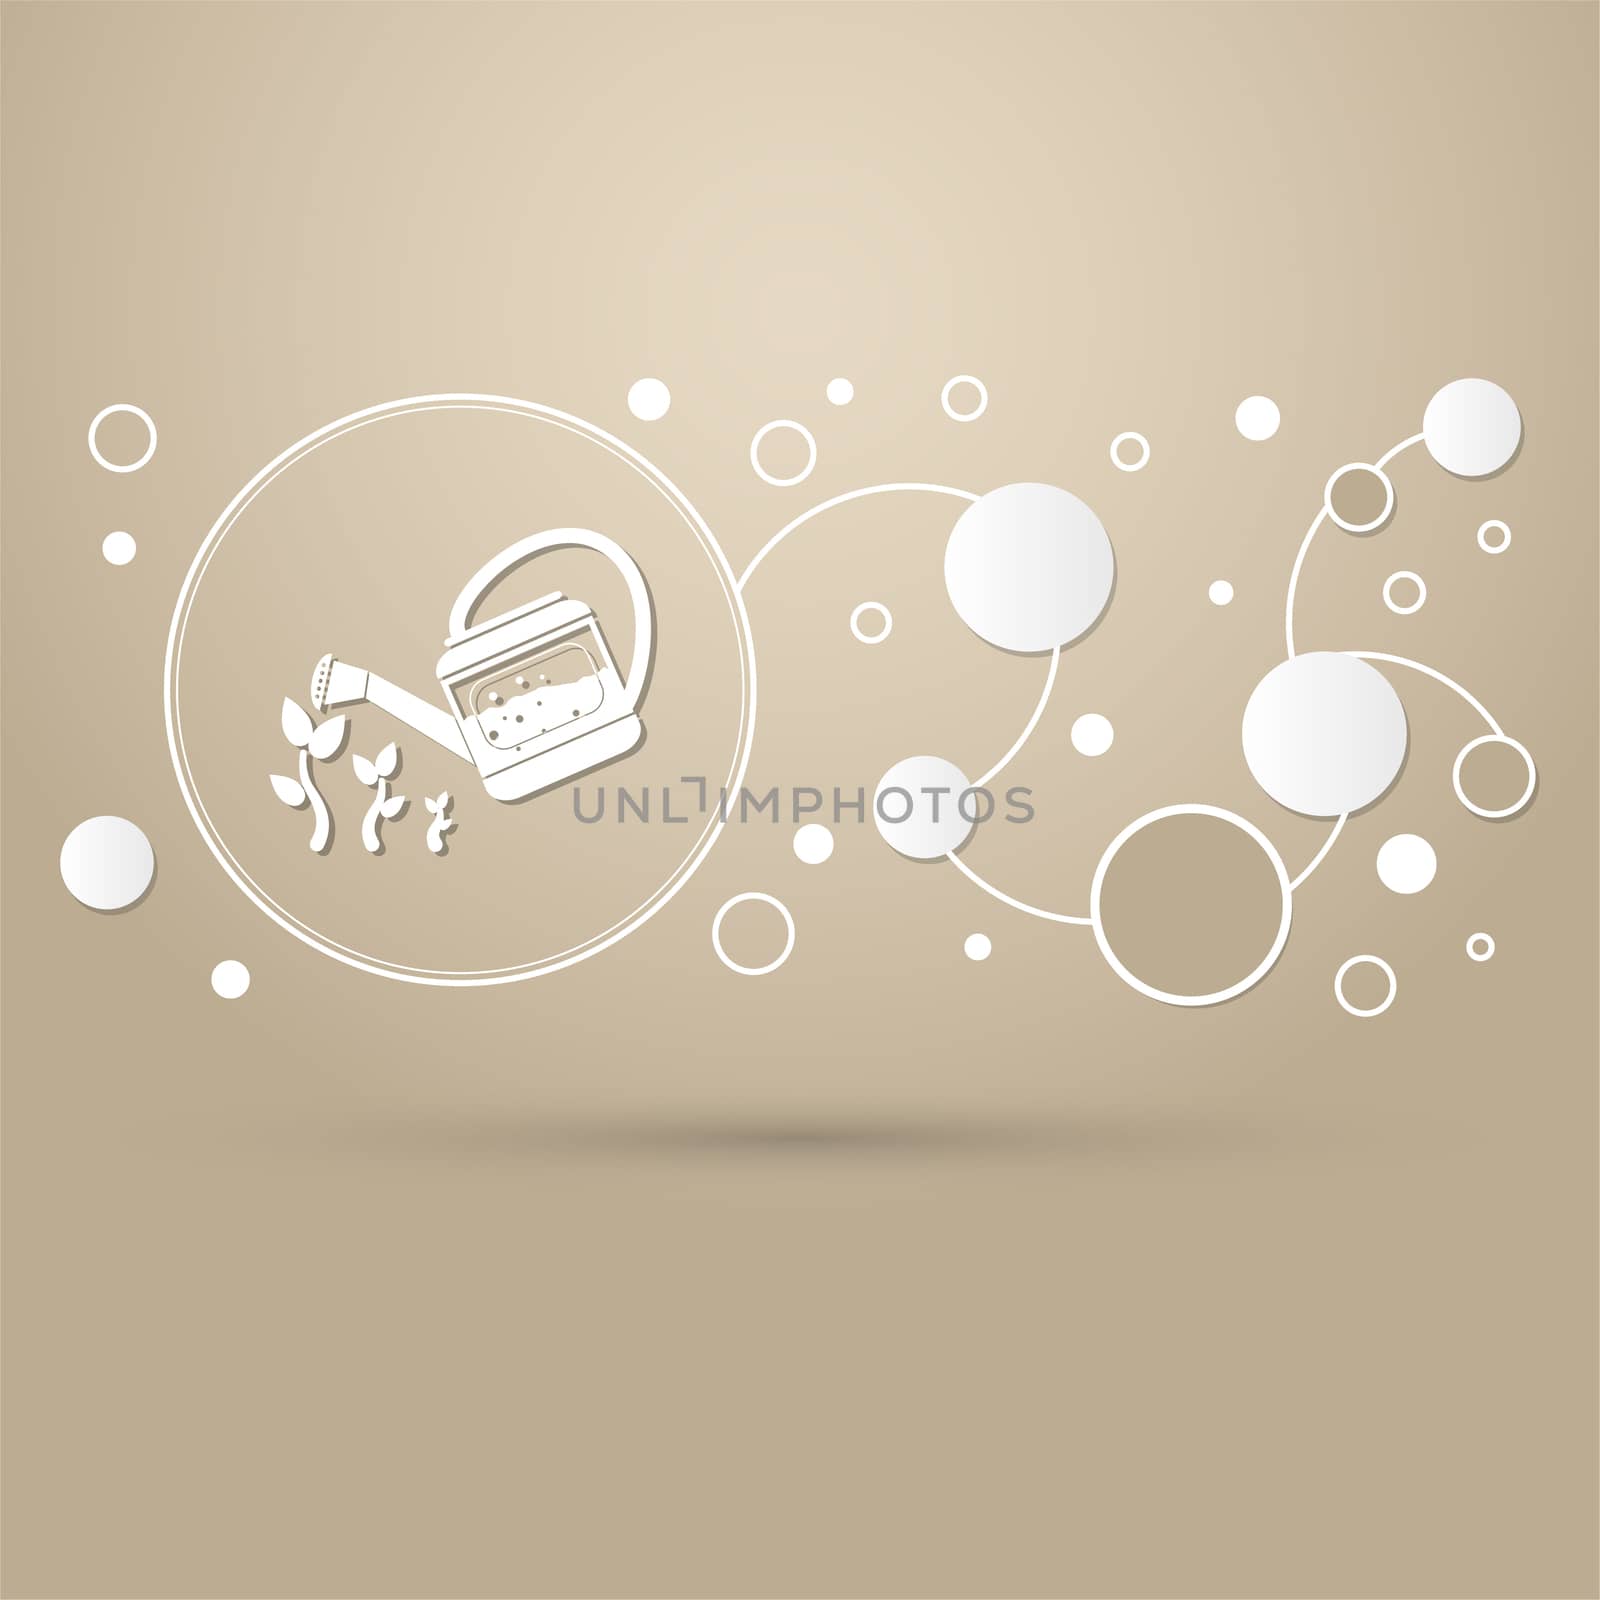 Watering can on a brown background with elegant style and modern design infographic.  by Adamchuk